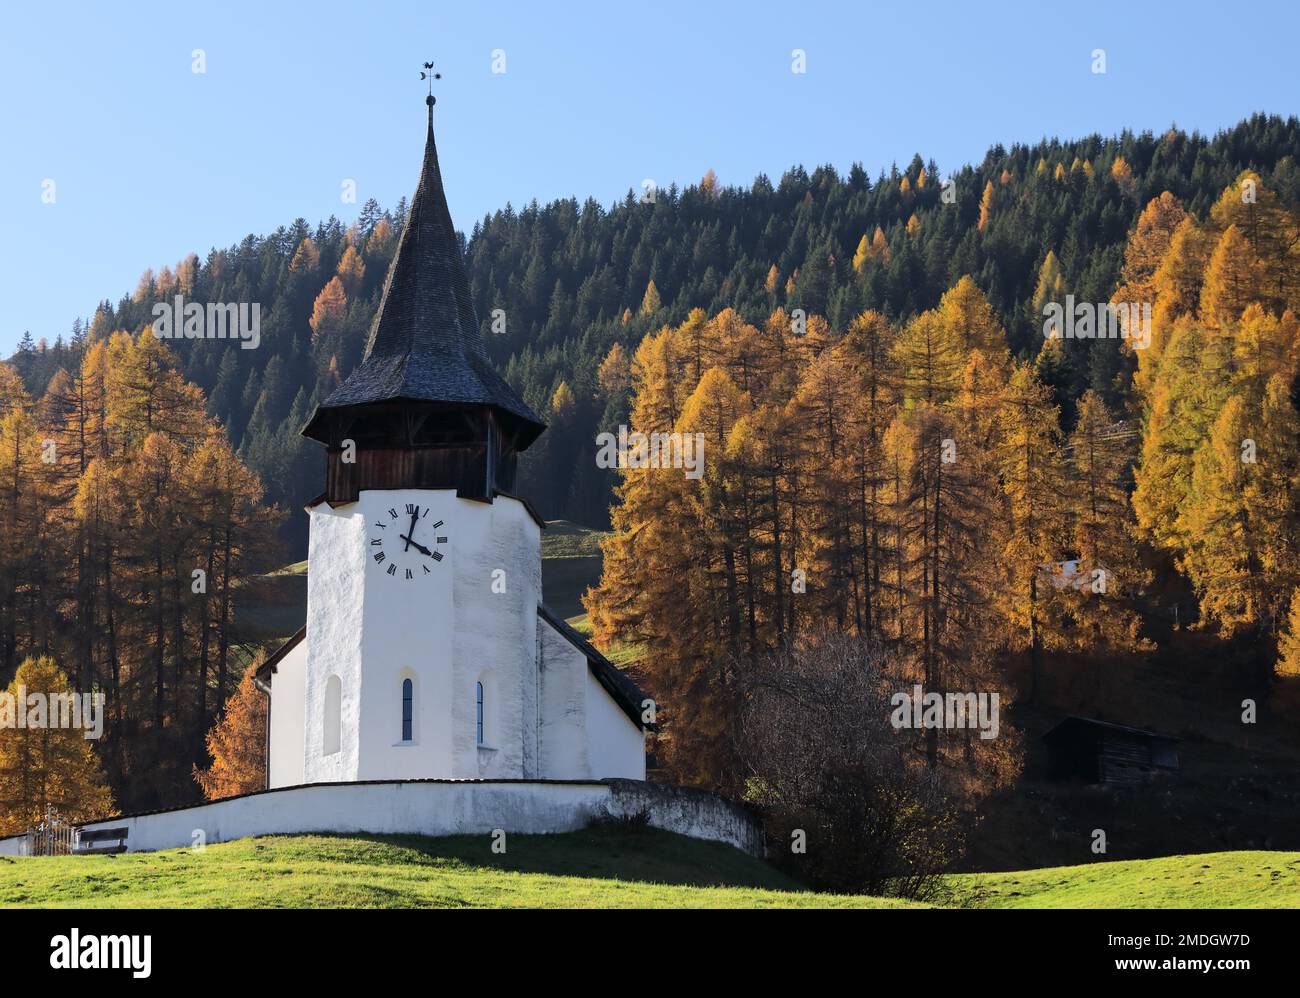 Reformierte Kirche church in the autumn Alps. Amazing landscape with small chapel on sunny meadow at Davos Frauenkirch, Davos, Switzerland Stock Photo